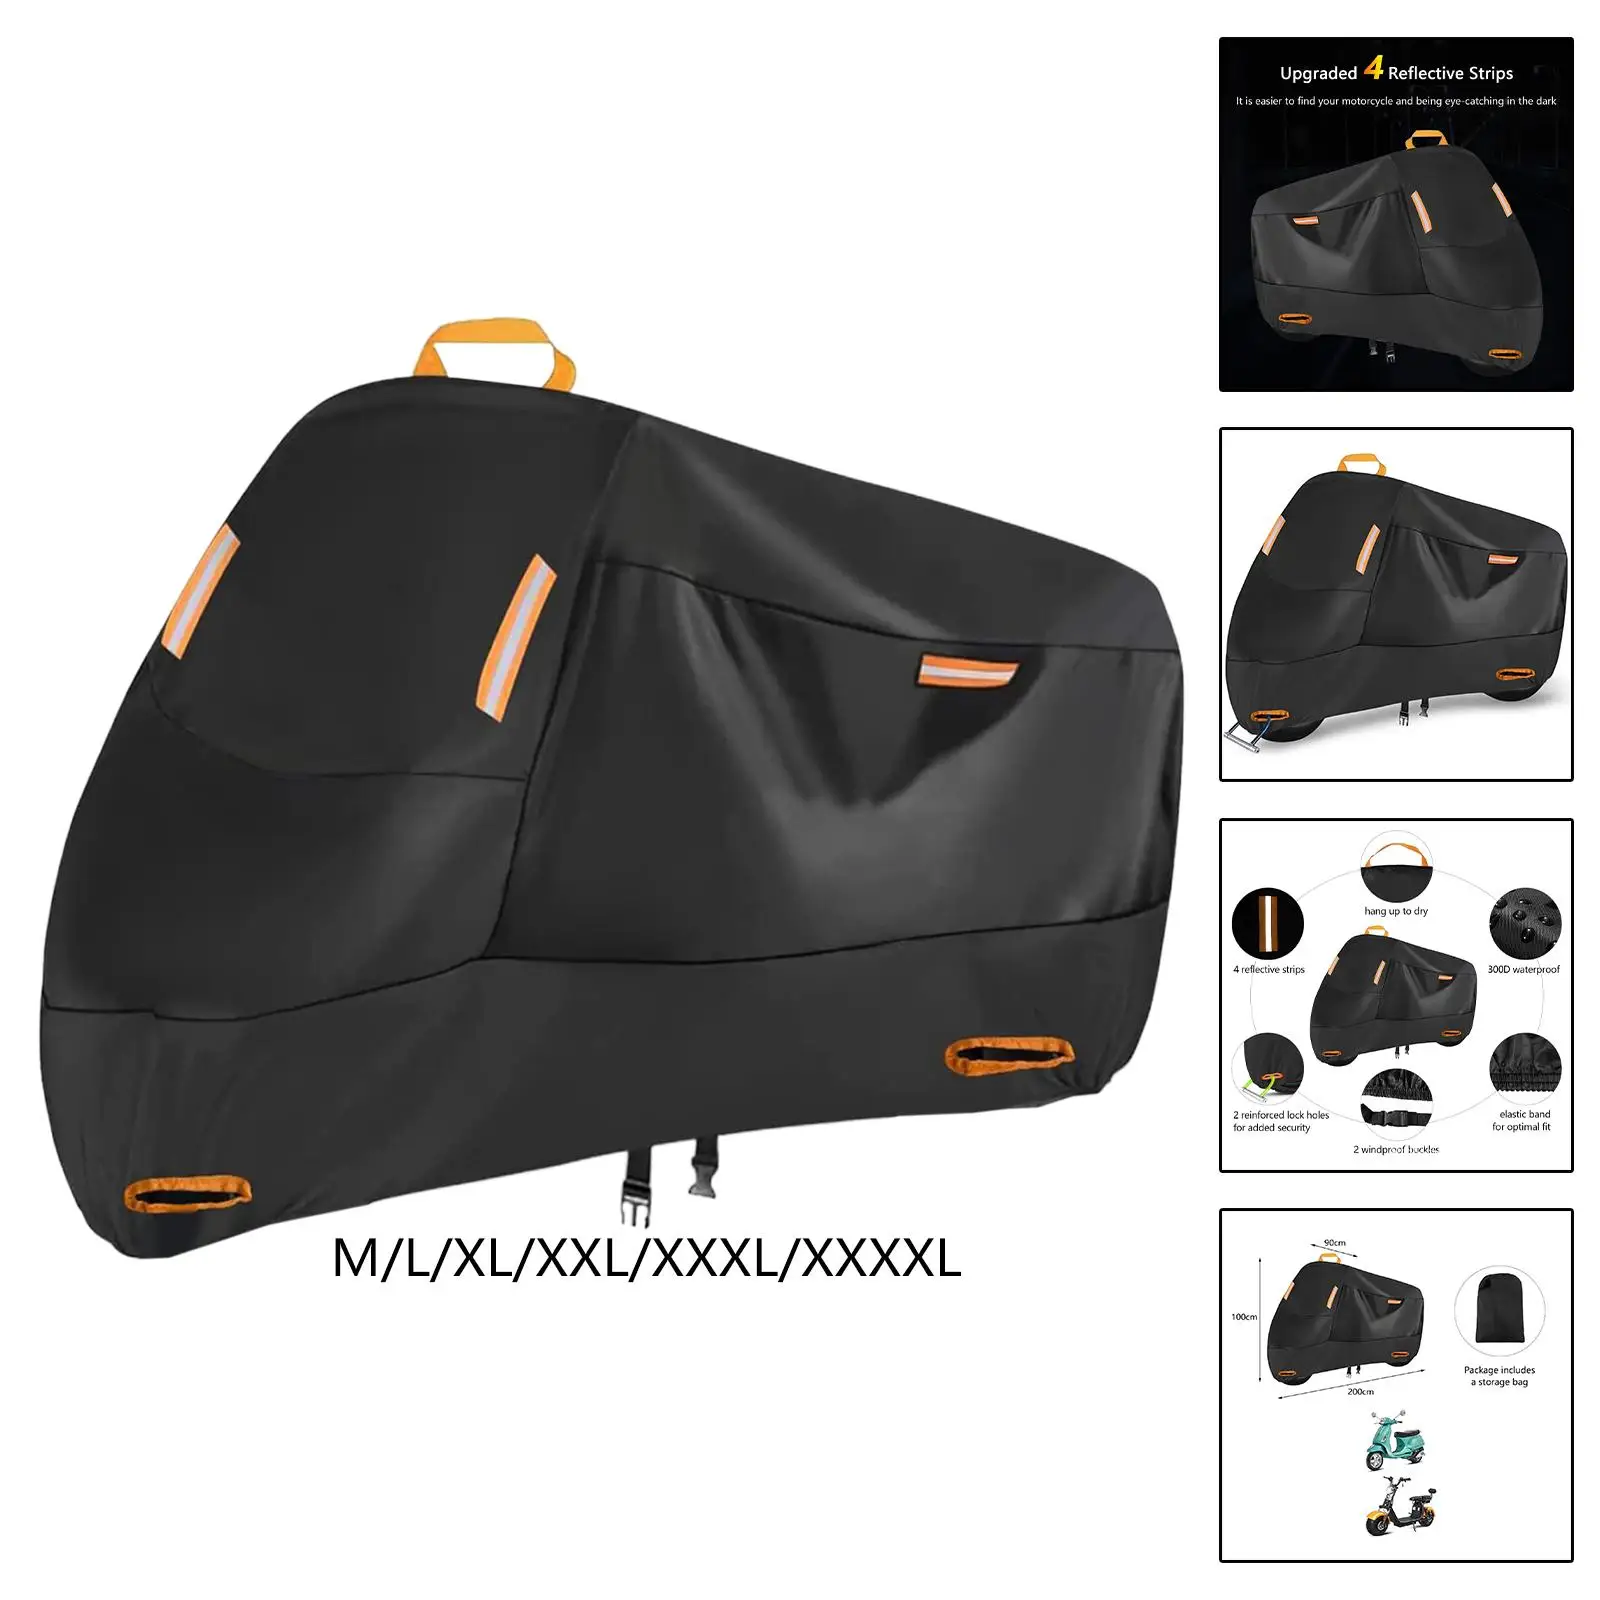 210D Motorcycle Cover with 4 Reflective Strips Motorbike Cover Scooter Cover for Bike Motorbike Scooter Outdoor Protection